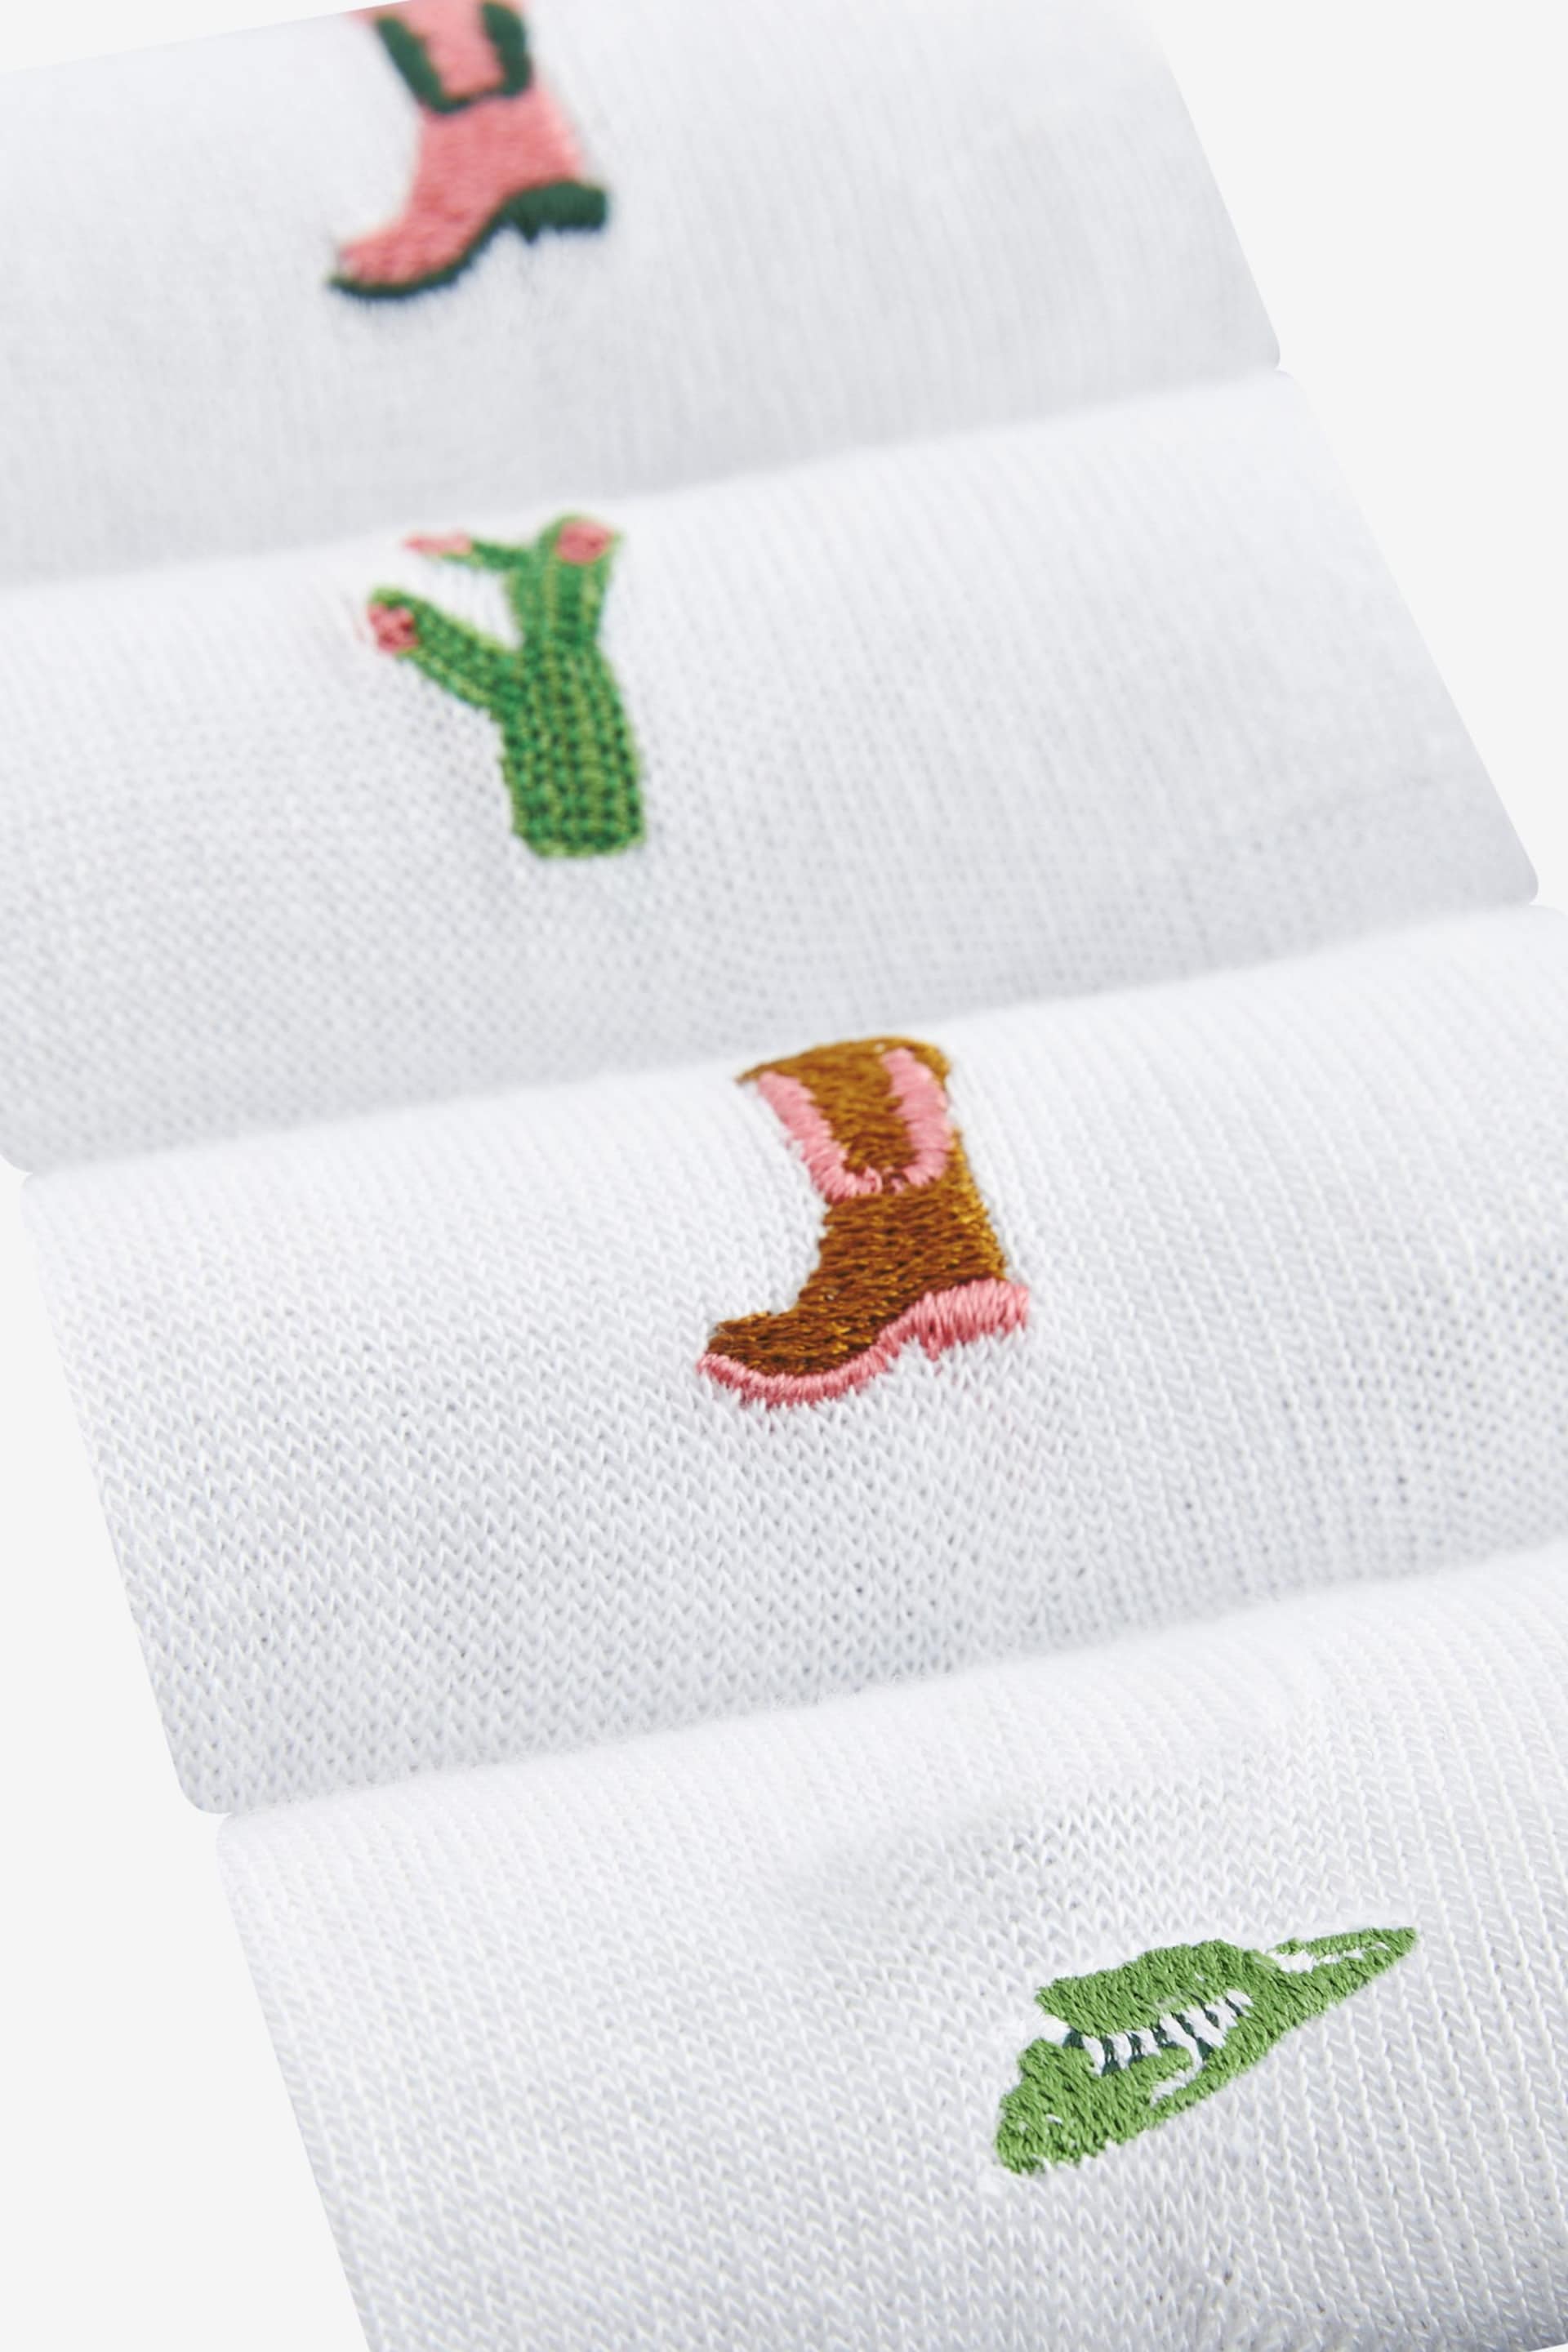 Cowgirl Embroidered Motif White Trainers Socks 4 Pack - Image 6 of 6